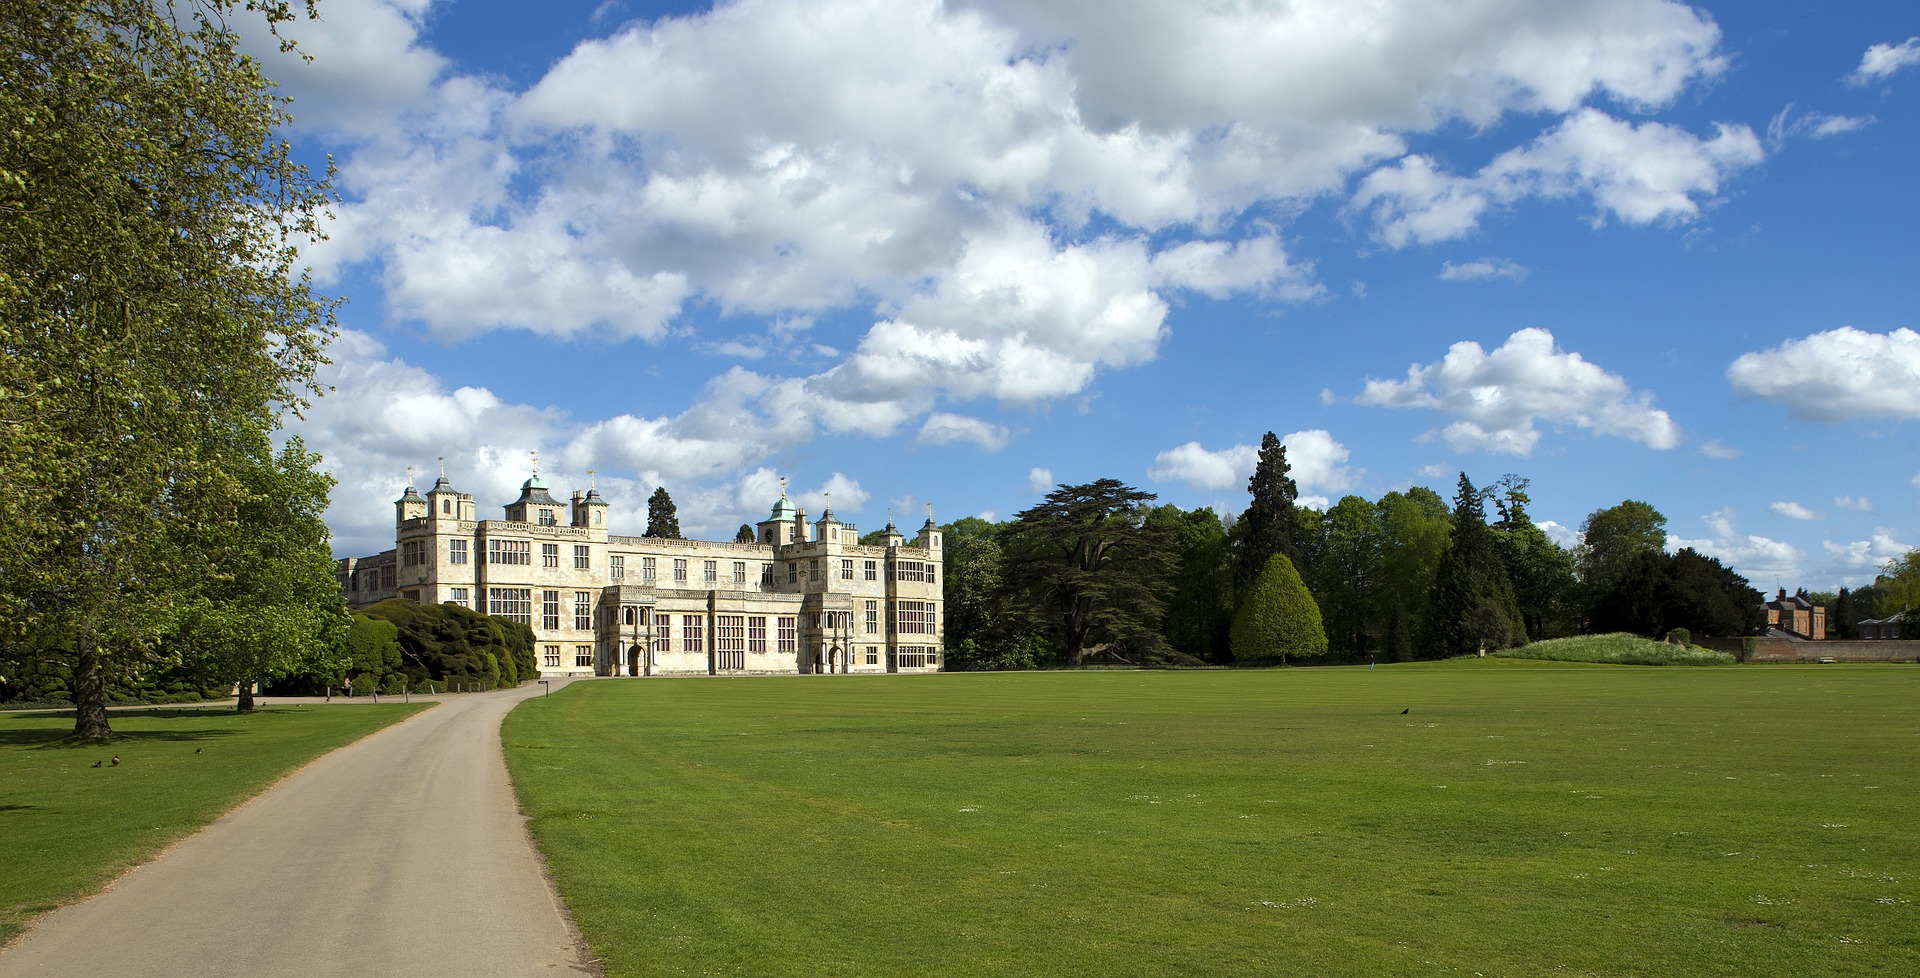 Audley end in essex